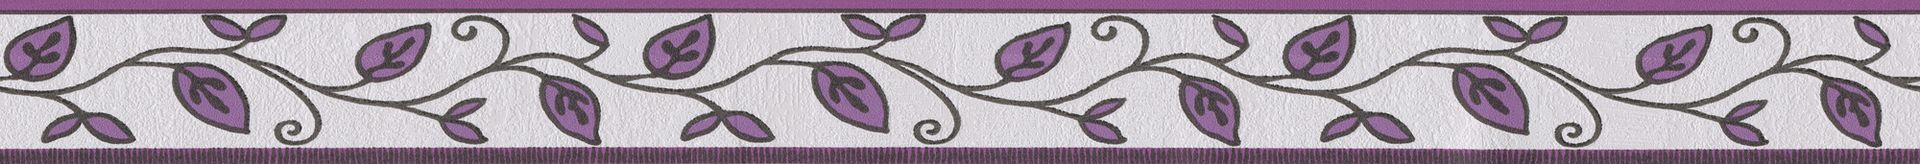 A.S. Création Only Borders 10, Florale Tapete, violett, creme 262226